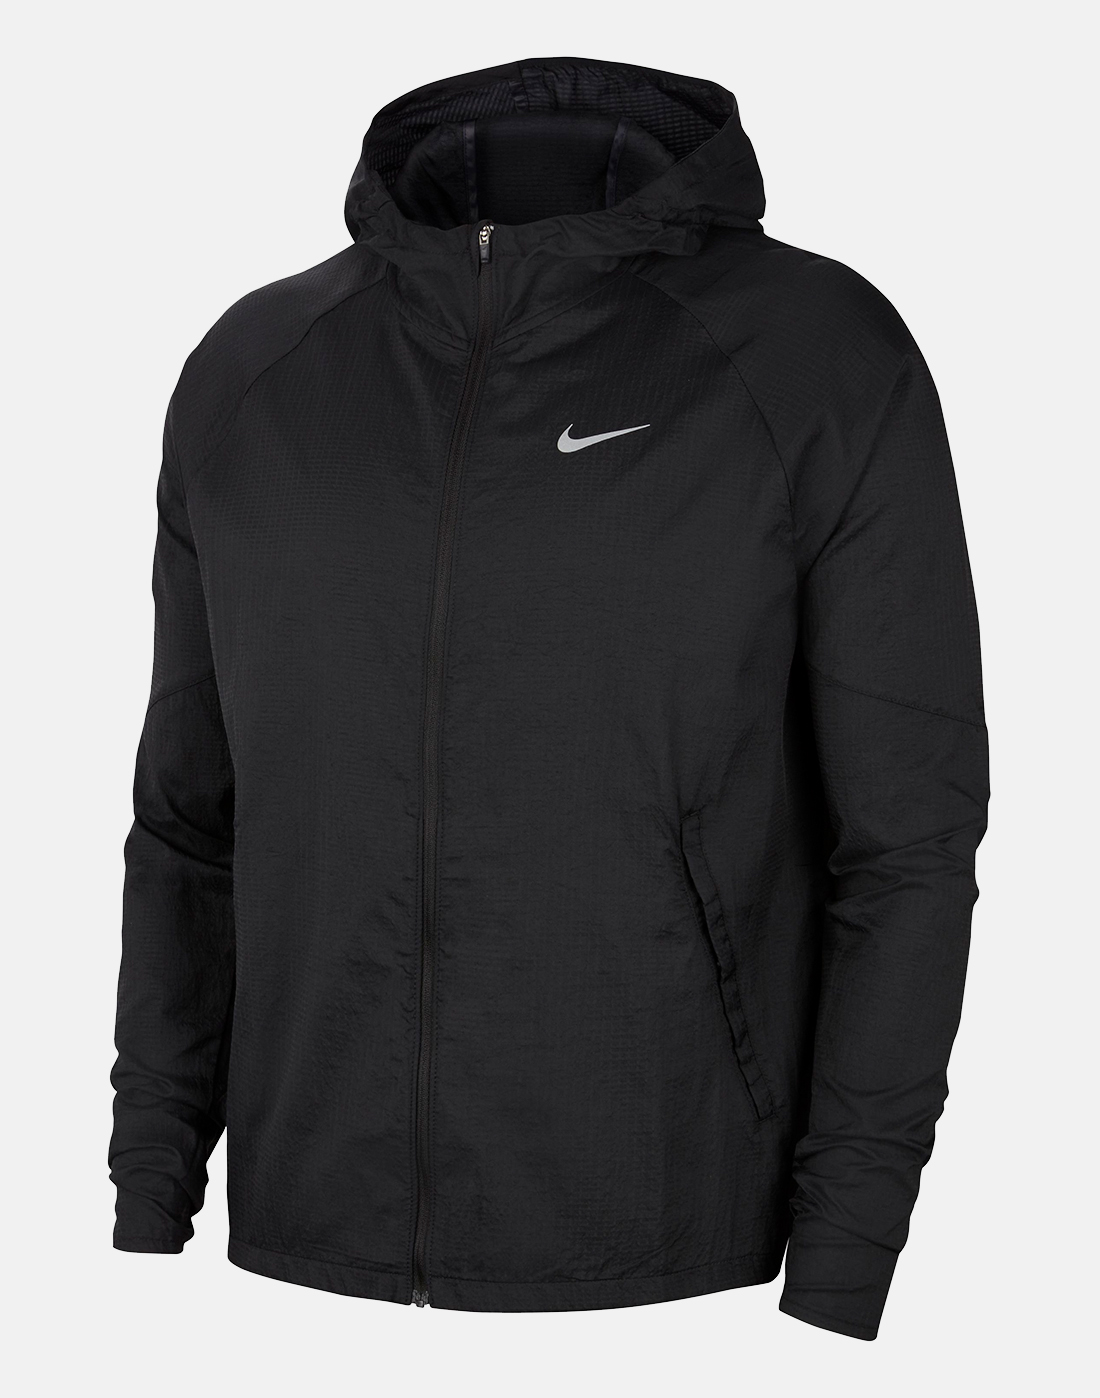 Nike Mens Essential Running Jacket - Black | Life Style Sports IE